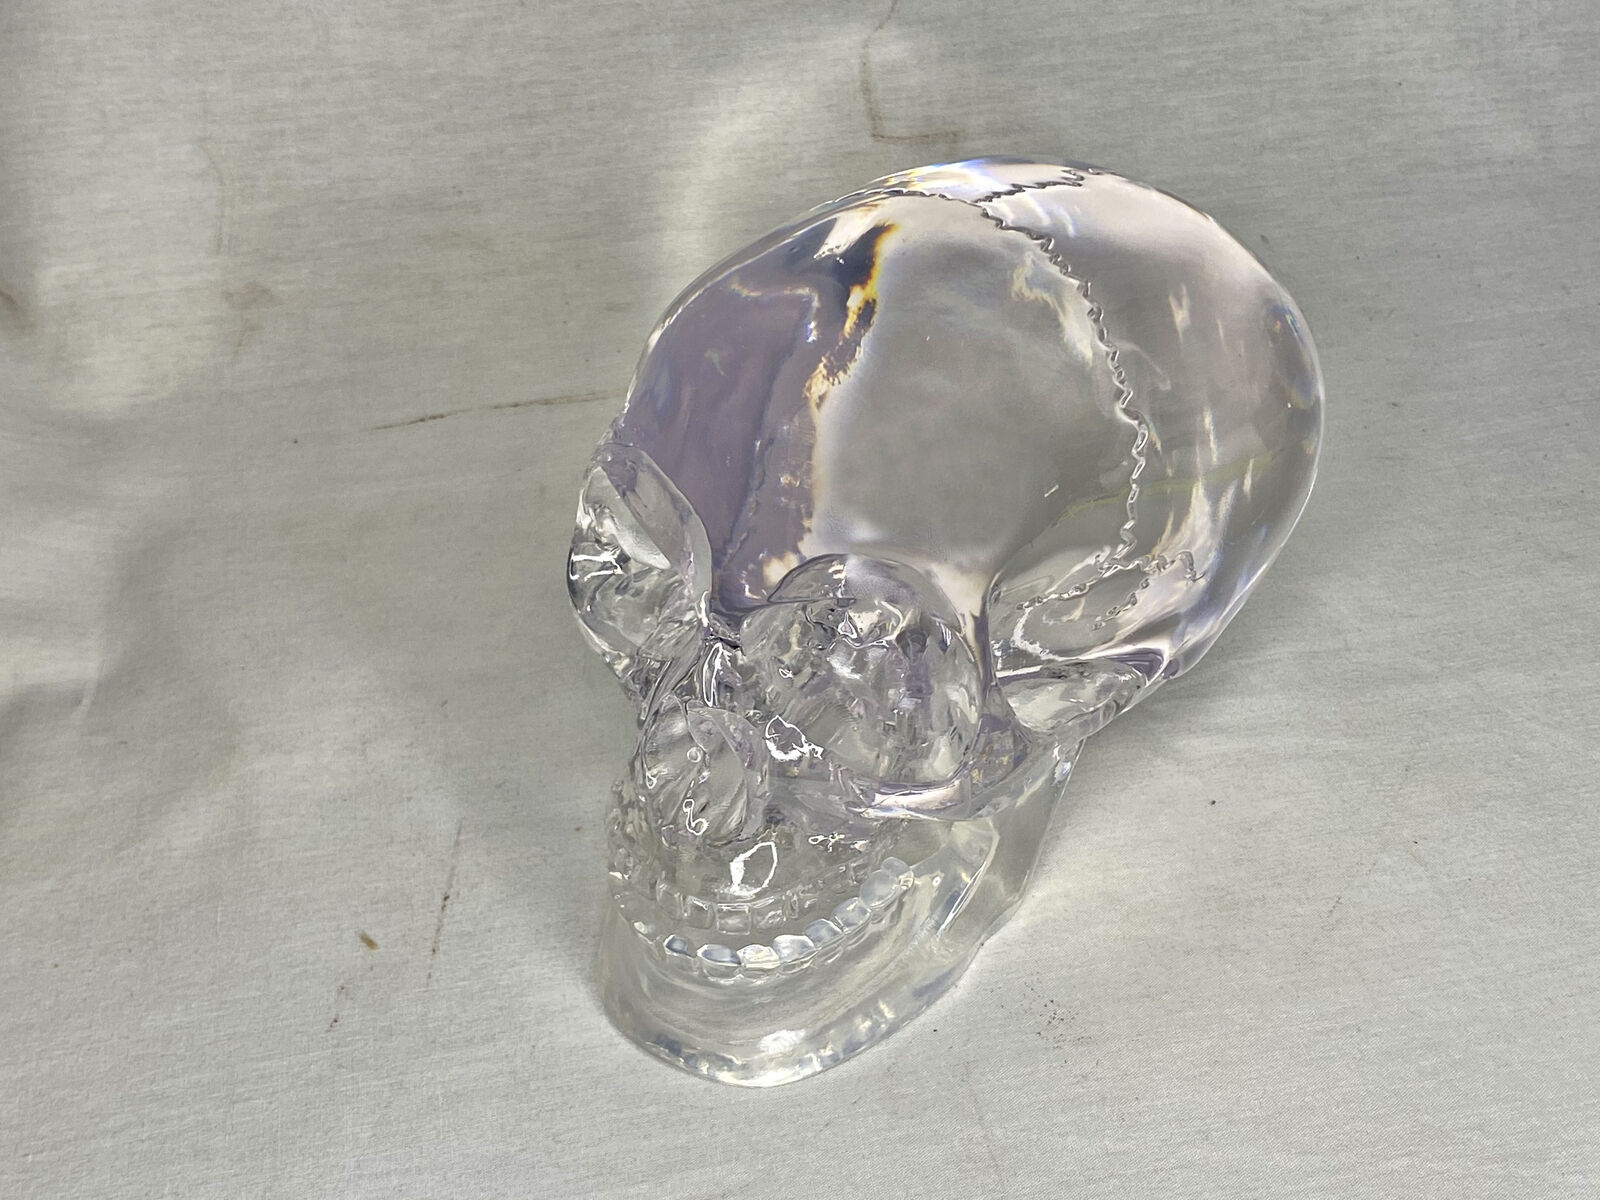 Mitchell Hedges Ancient Crystal Skull Replica, Solid Acrylic, Free Color Book